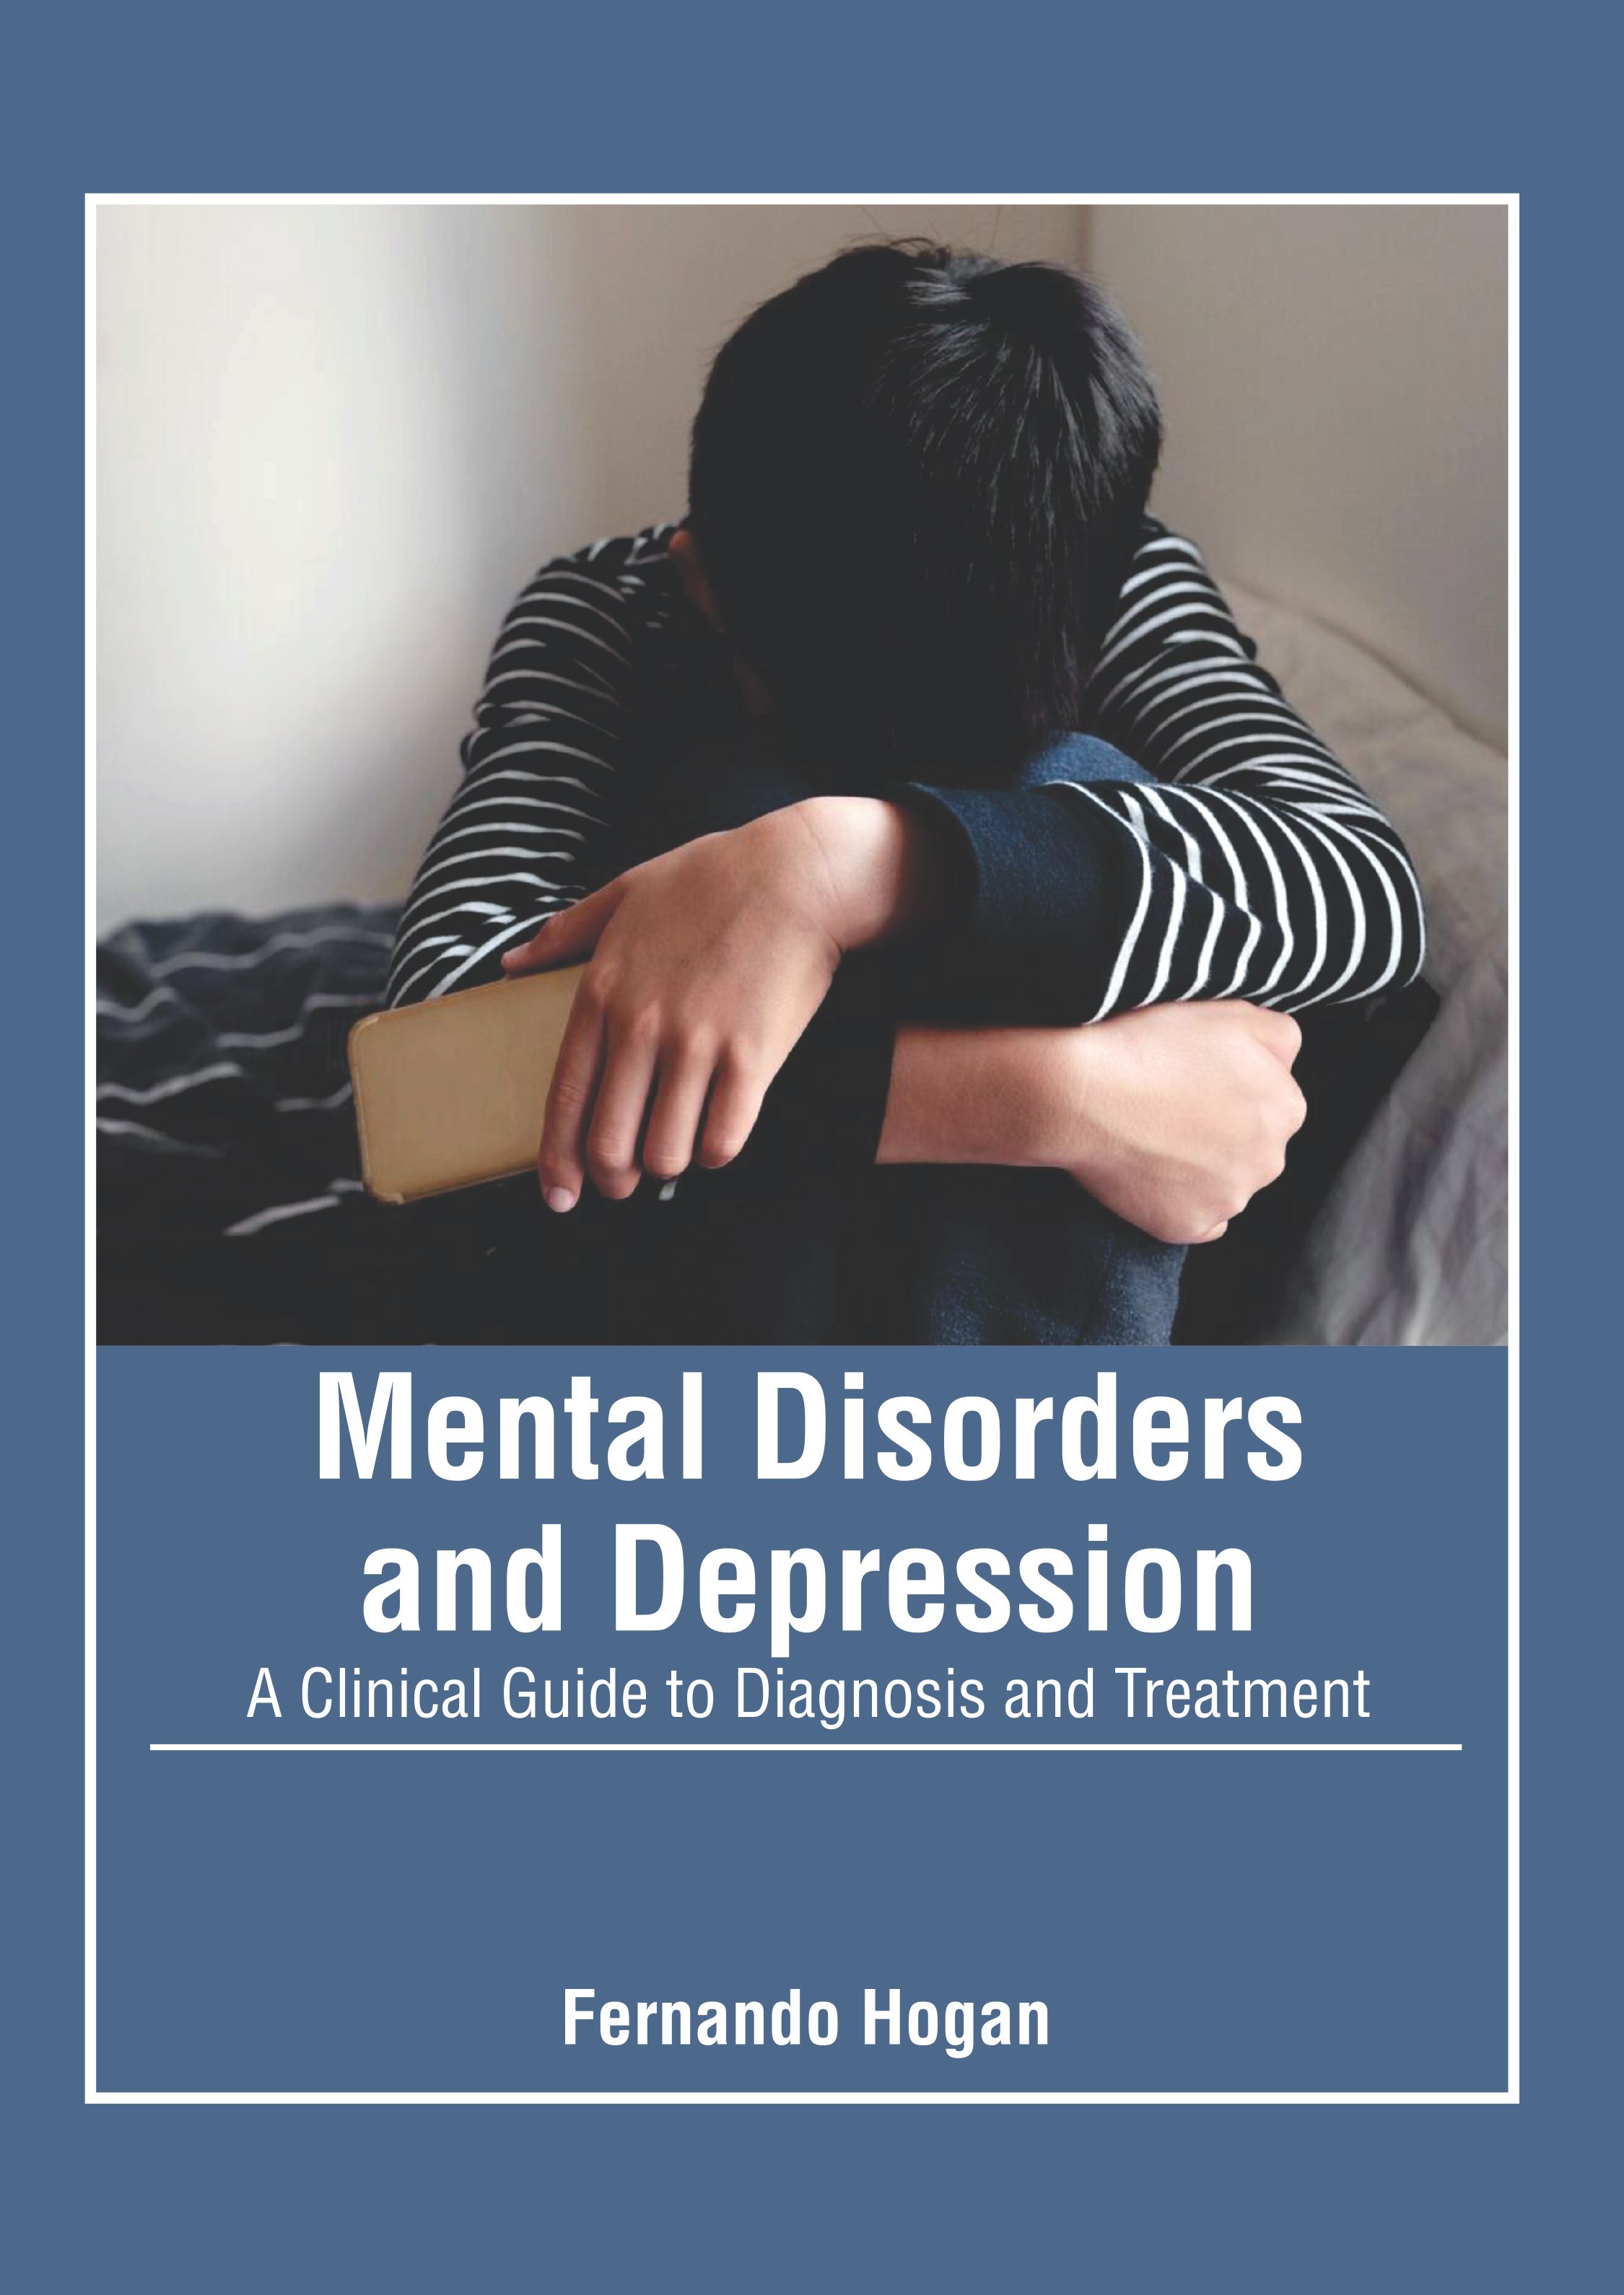 MENTAL DISORDERS AND DEPRESSION: A CLINICAL GUIDE TO DIAGNOSIS AND TREATMENT